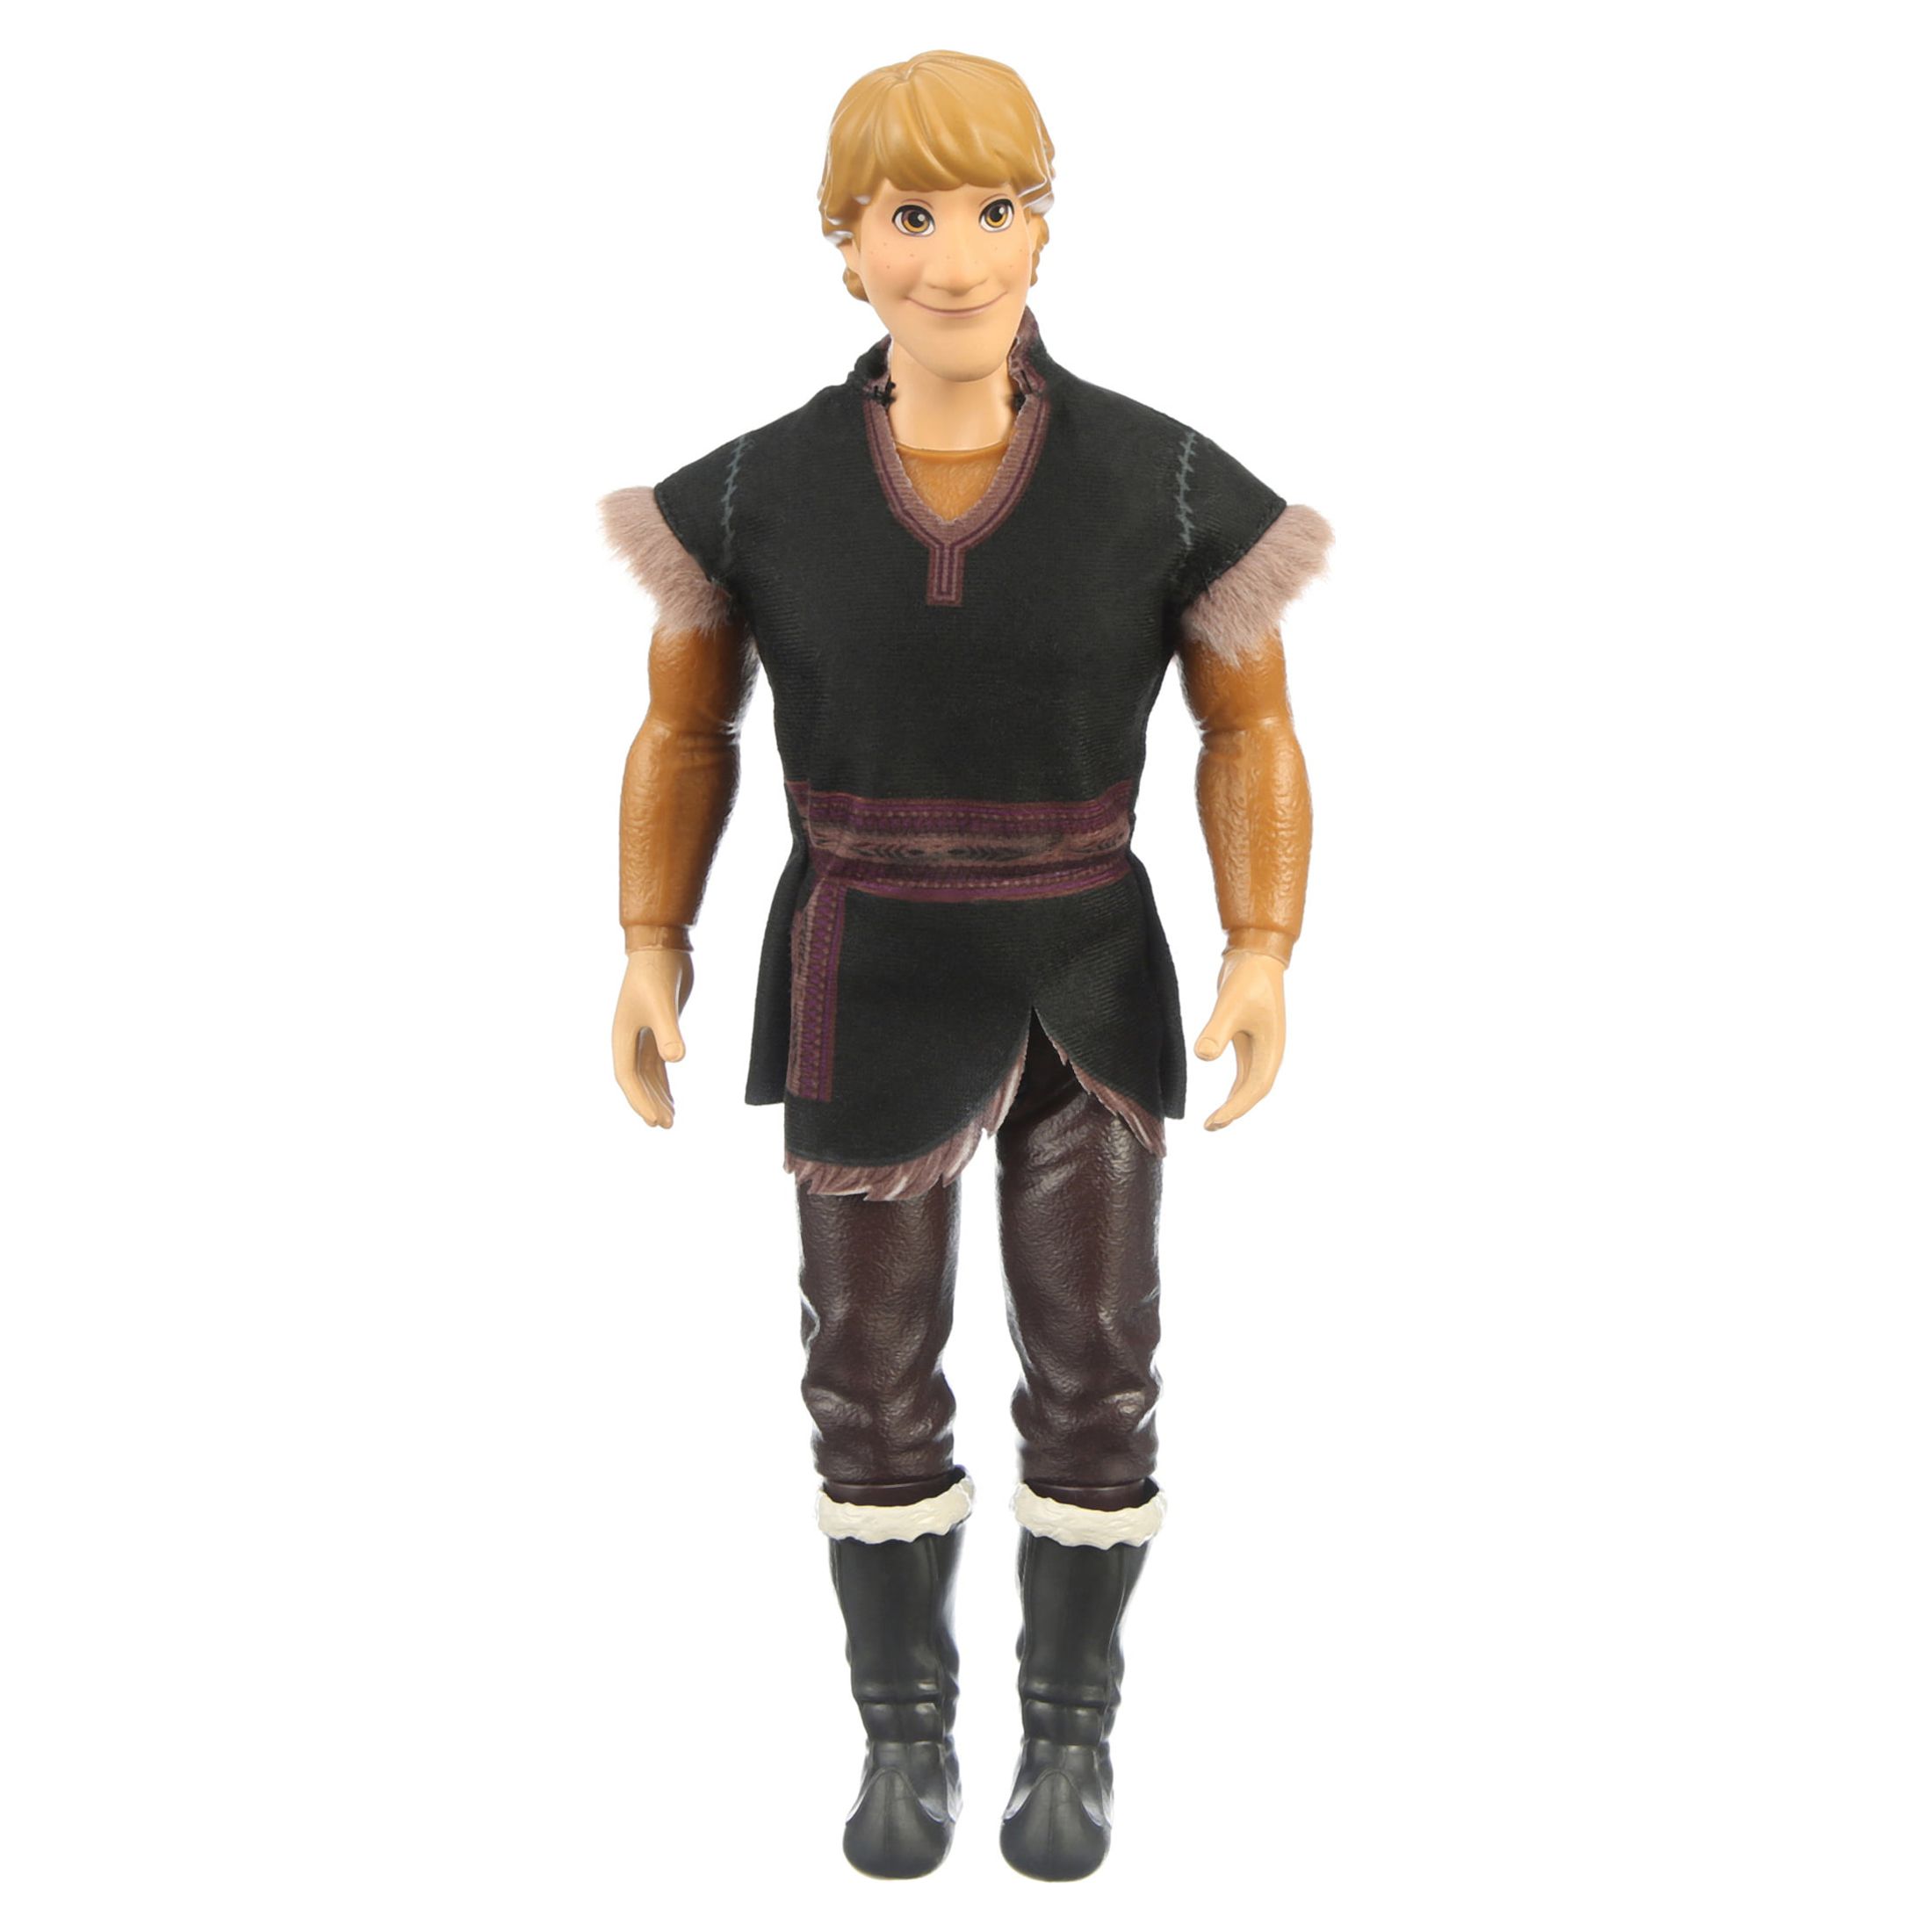 Disney Frozen 2 Kristoff Fashion Doll, Includes Brown Outfit Inspired ...